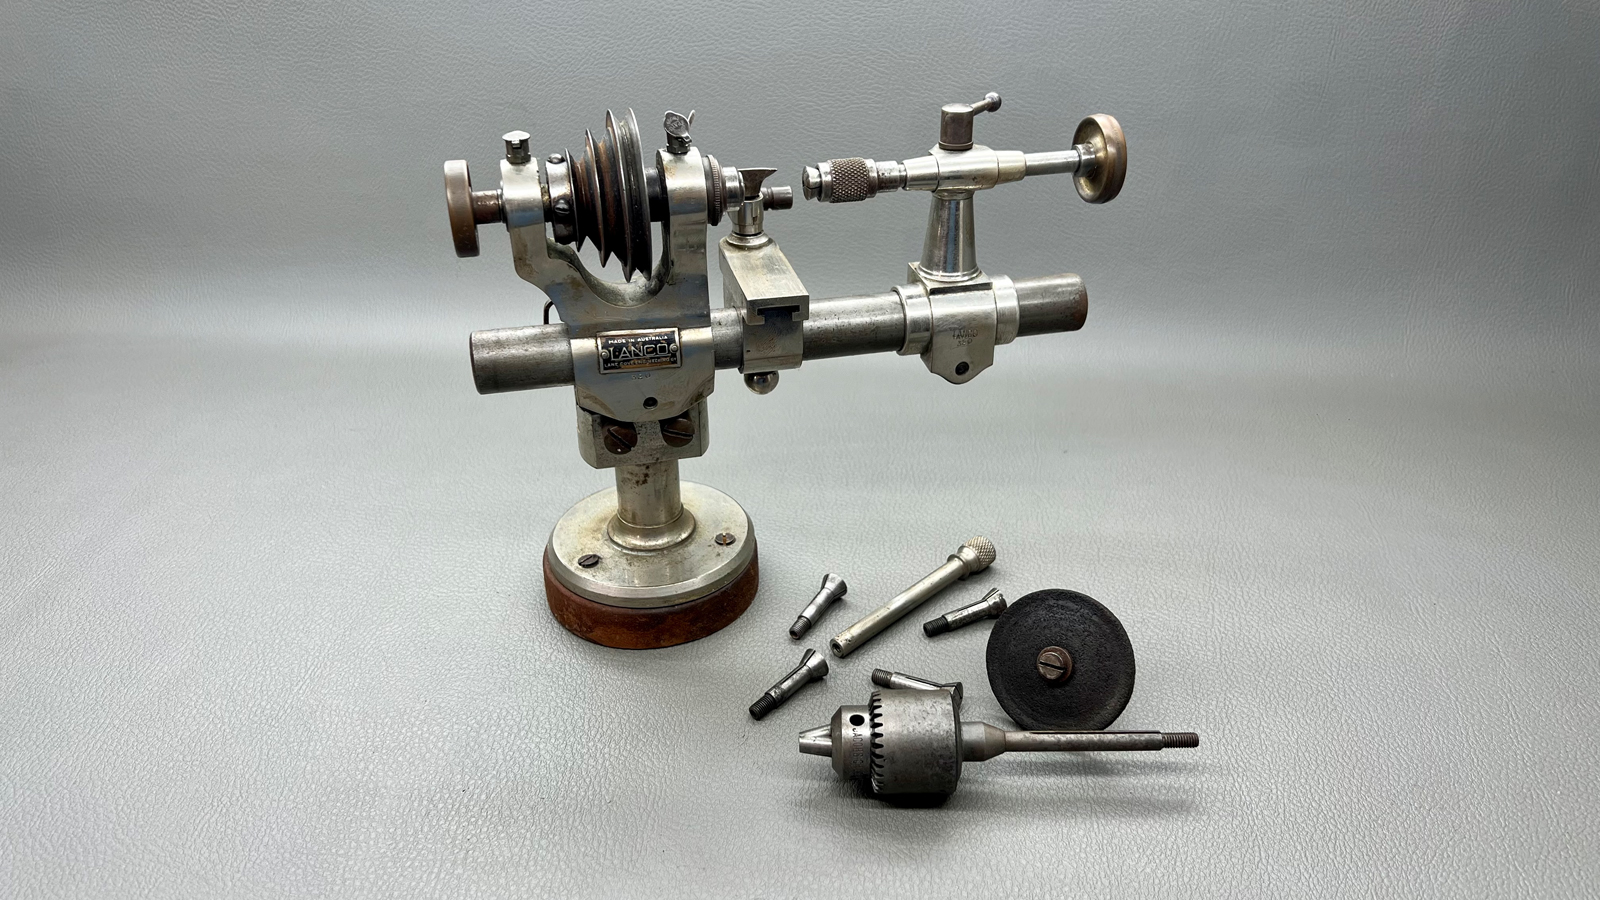 5794-385 Antique American Watch Tool Co. Watchmaker's Lathe with Wood  Enclosure « Gold International Machinery | The One Stop Shop for all of  your Machinery, Equipment, Tool & Die Needs